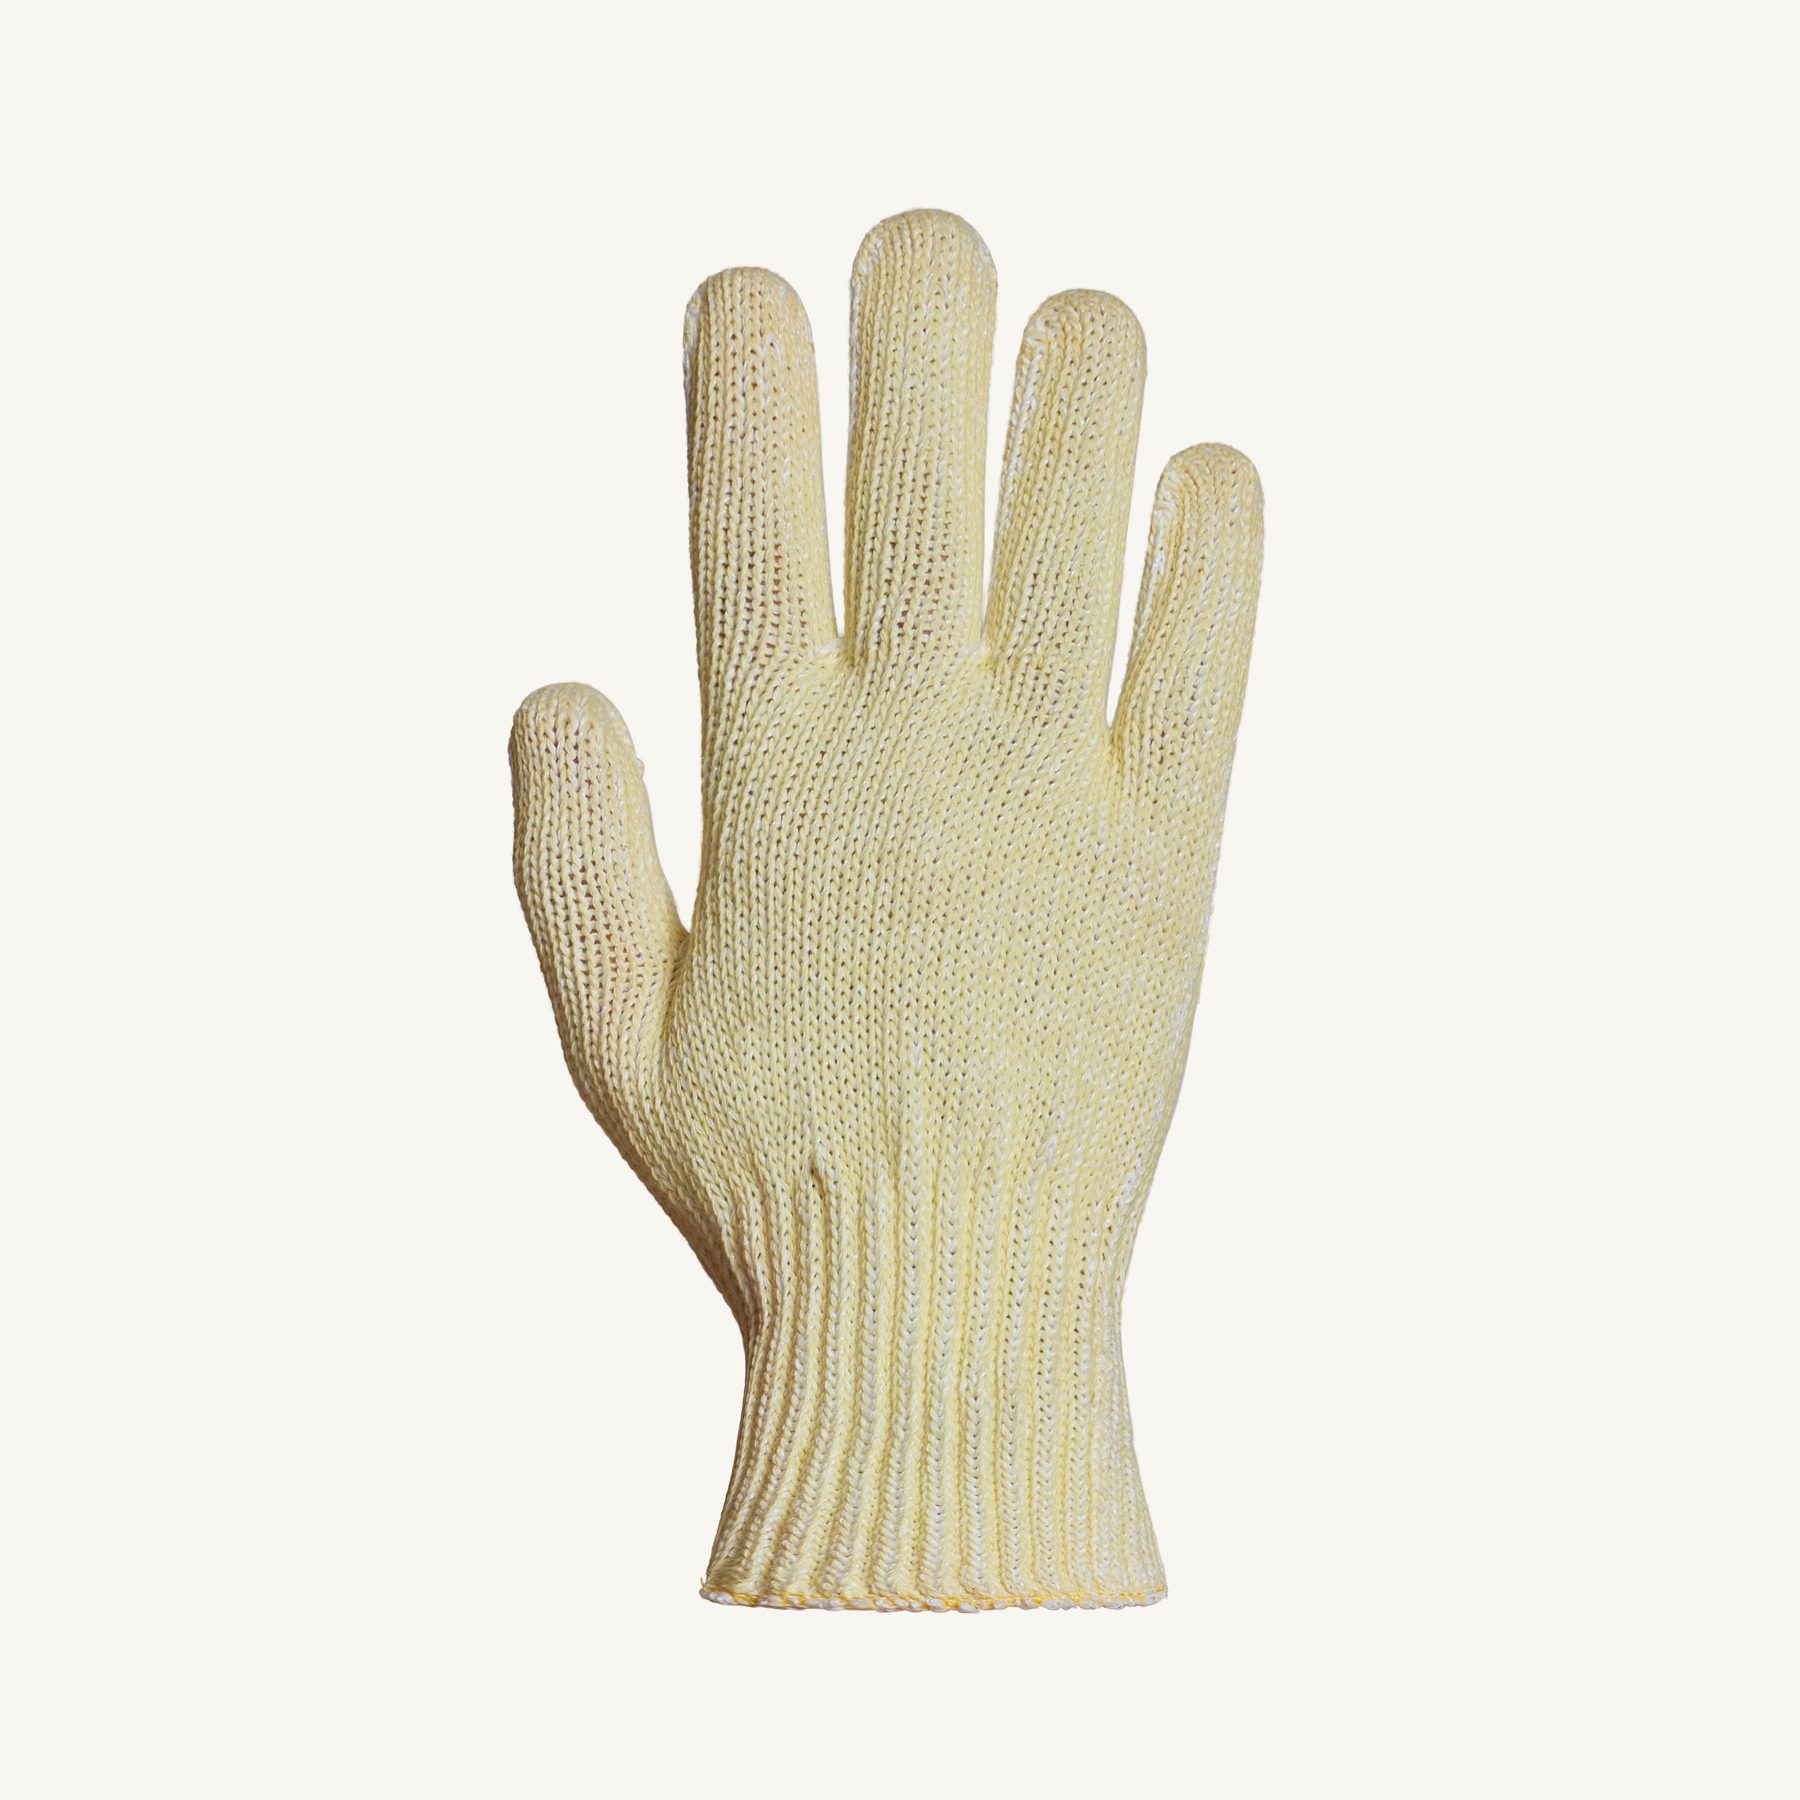 To 500 ° C NEW Heat Resistant Gloves from Aramit Kevlar 